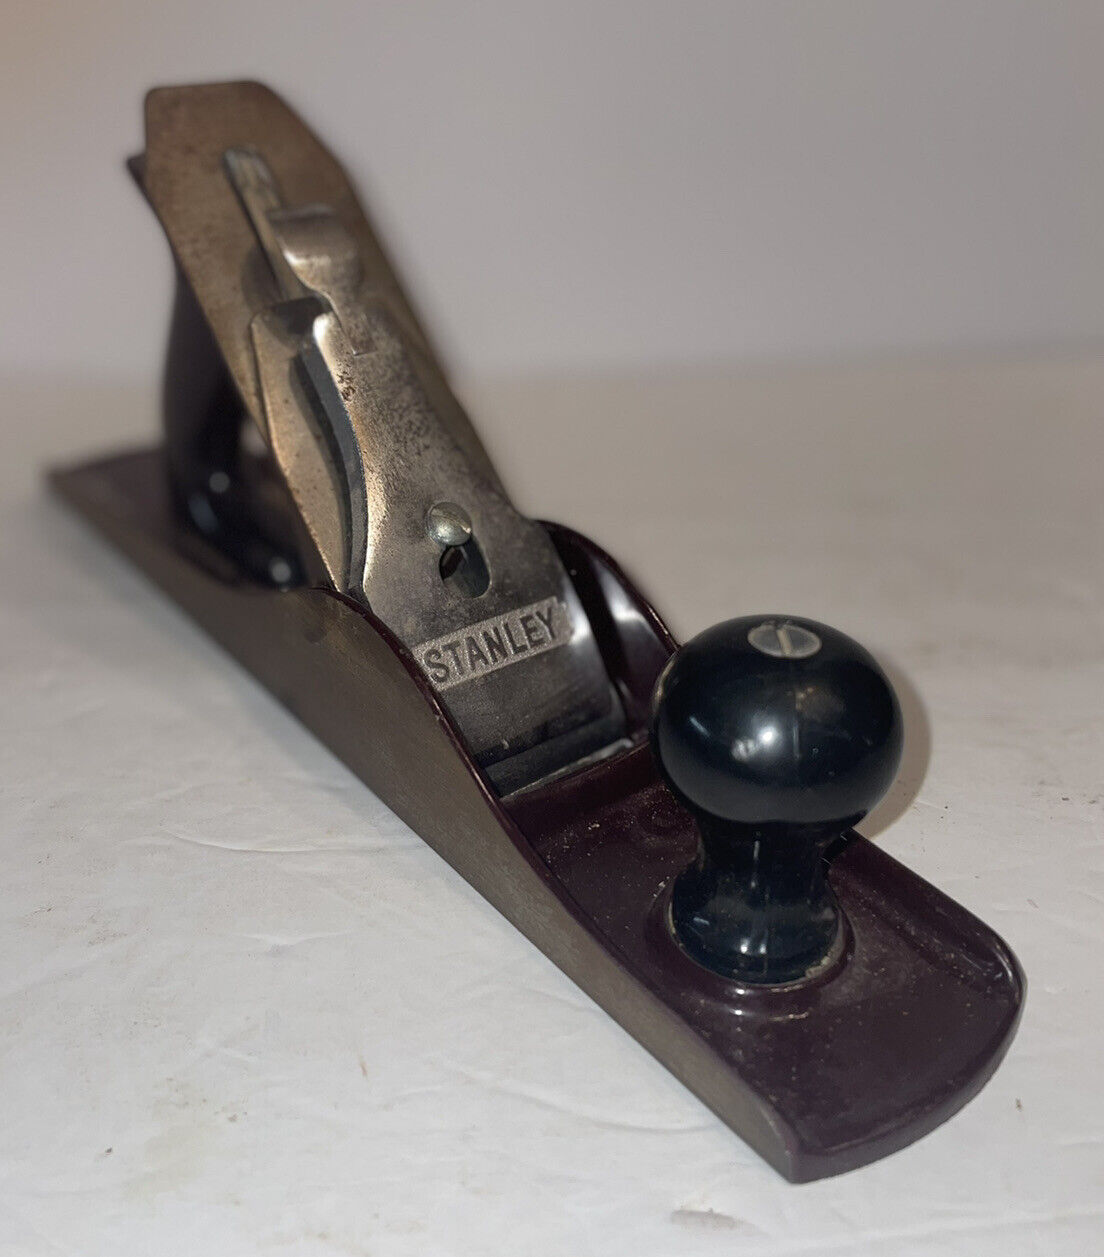 Stanley Smooth Bottom BENCH Wood Plane No.12-205 Made in England